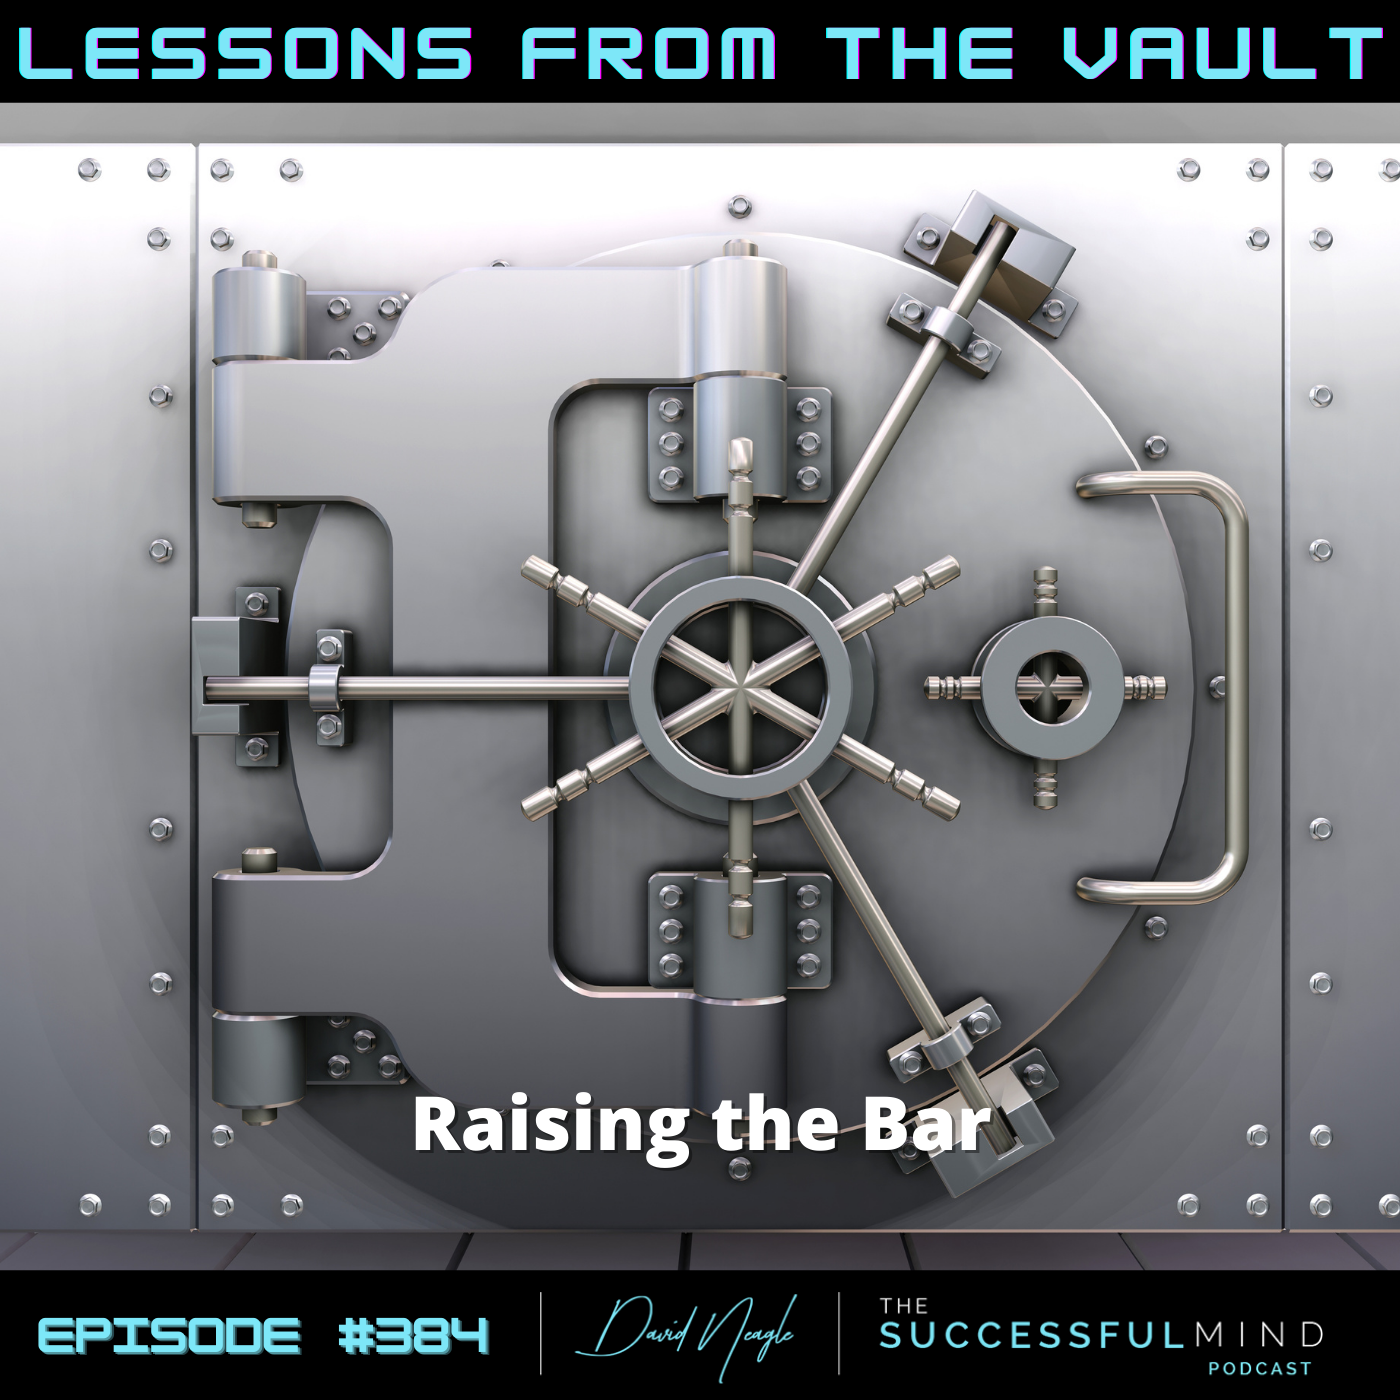 The Successful Mind Podcast- Lessons From The Vault - Raising the Bar